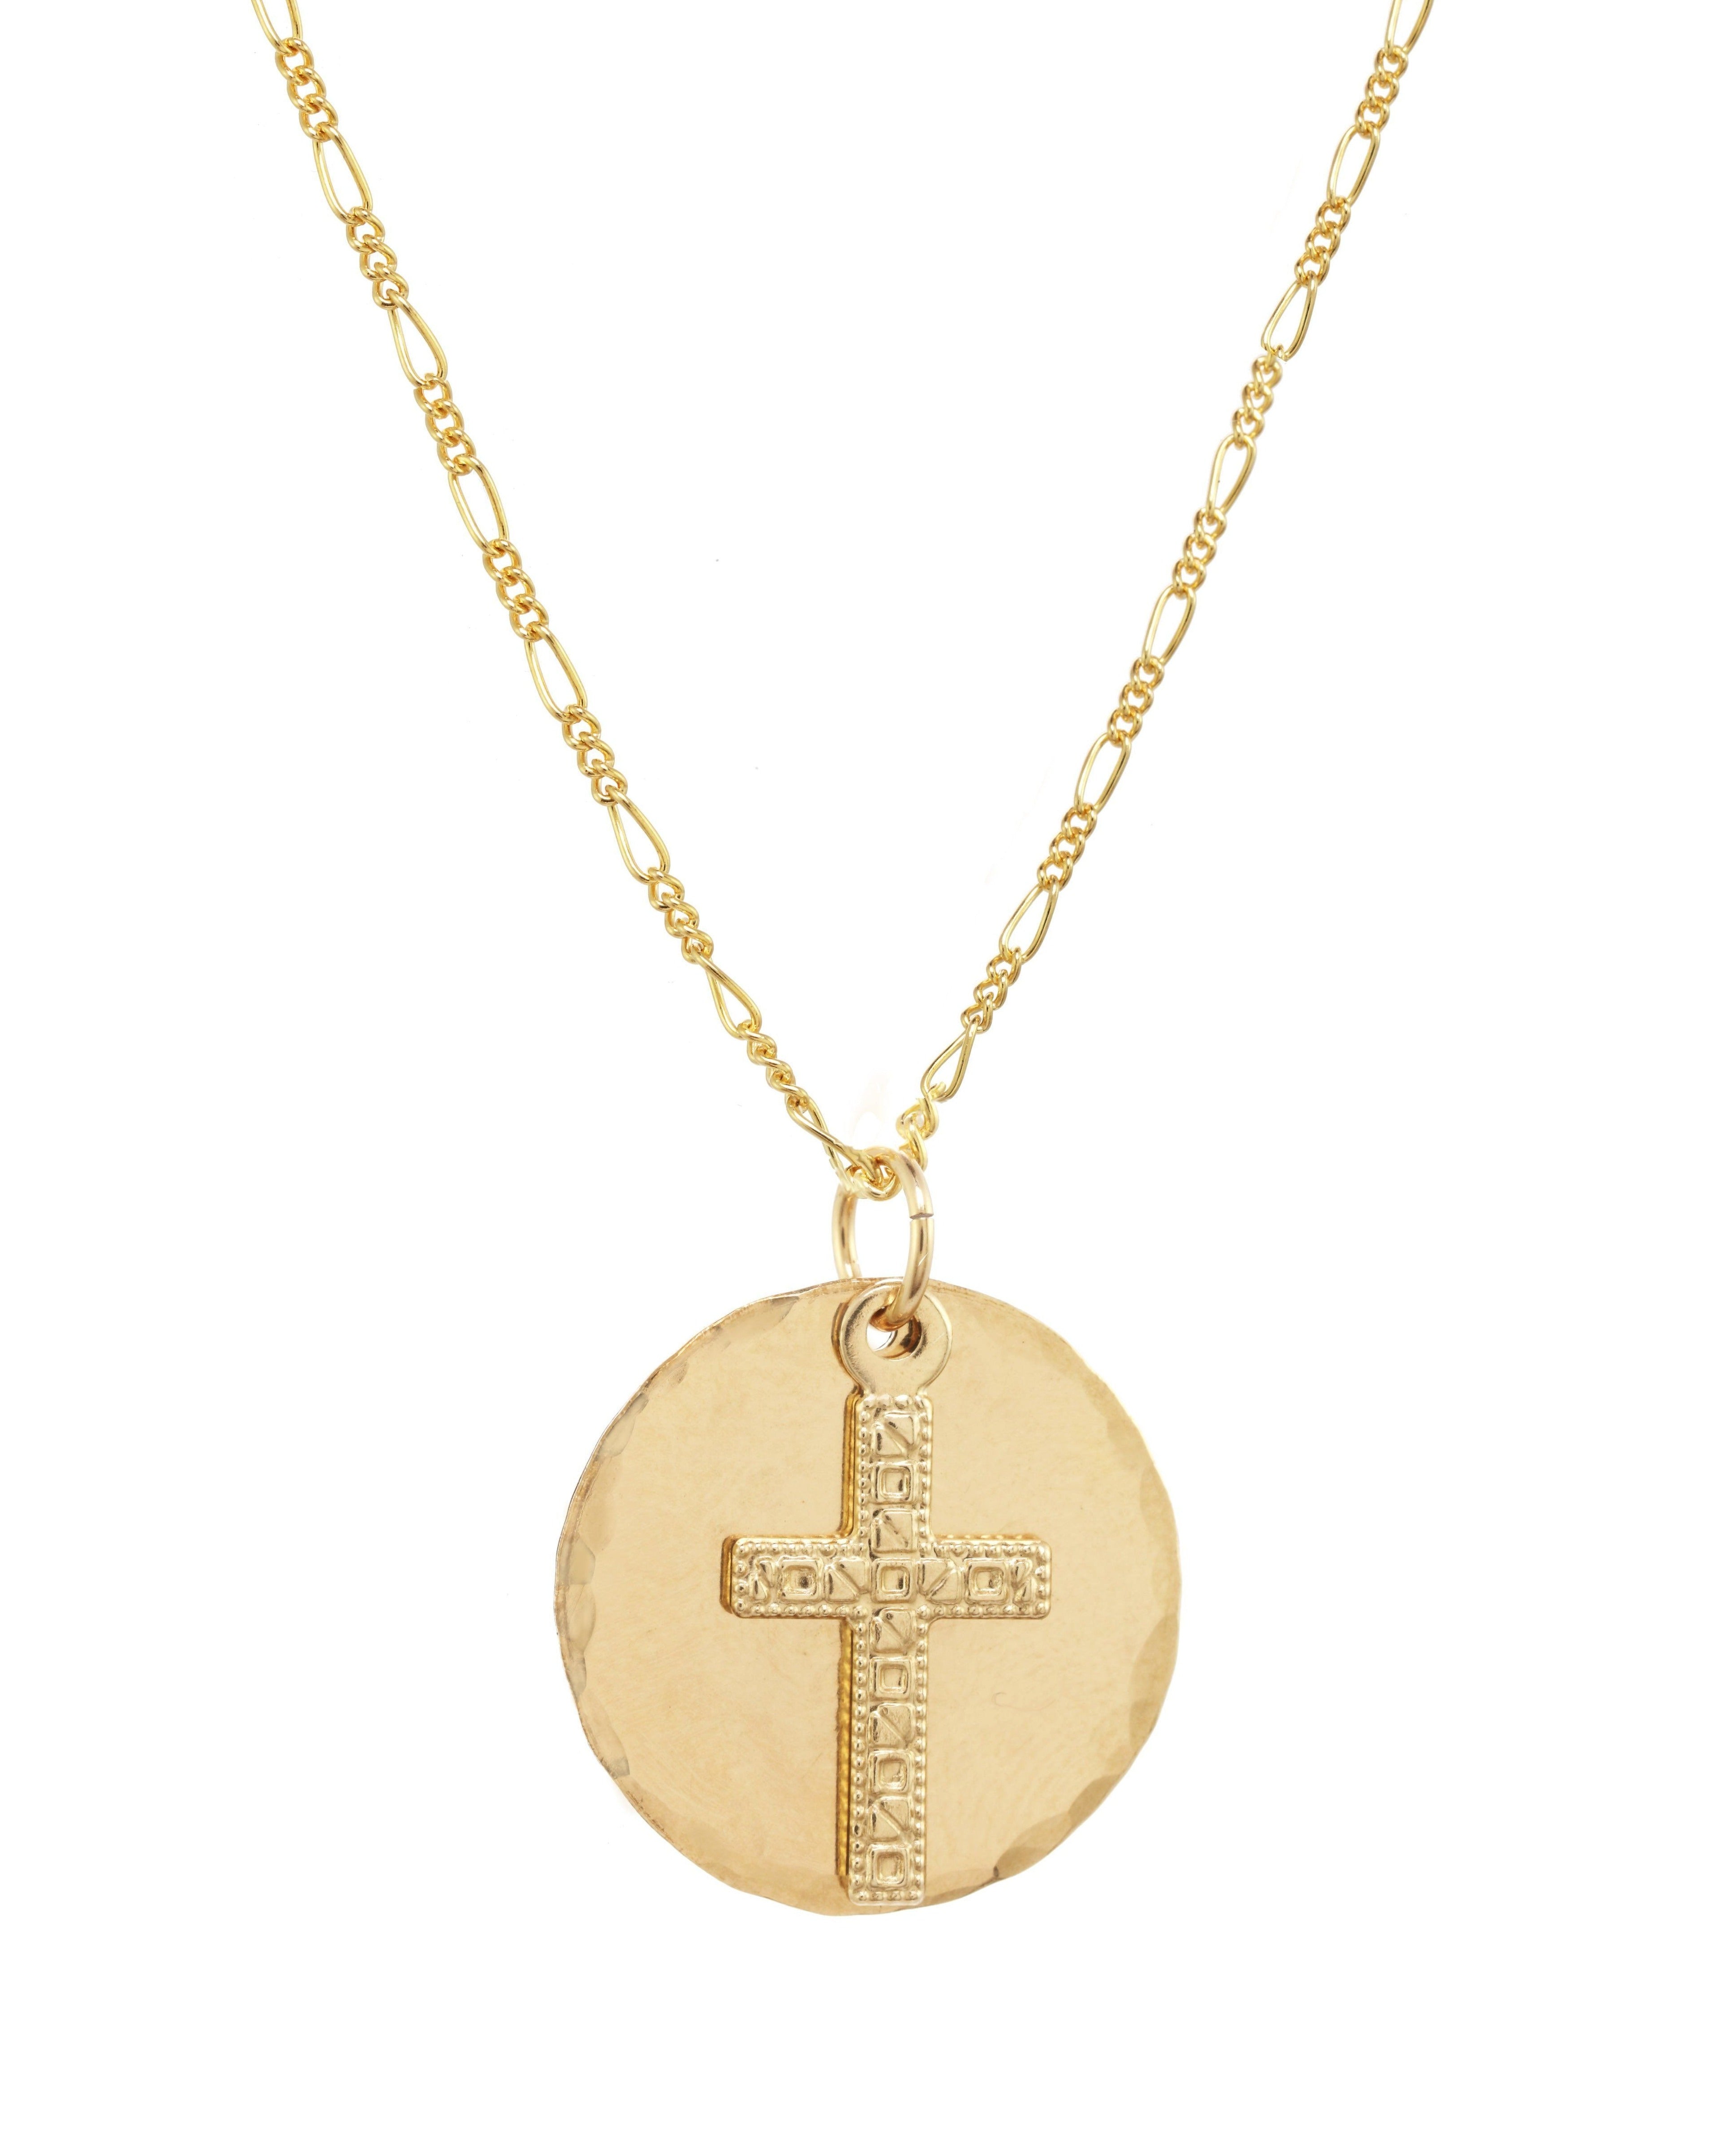 Orbis Necklace by KOZAKH. A 16 to 18 inch adjustable length Figaro chain necklace, crafted in 14K Gold Filled, featuring a 16mm Hammered on the sides coin and a 5x10mm Filigree cross.